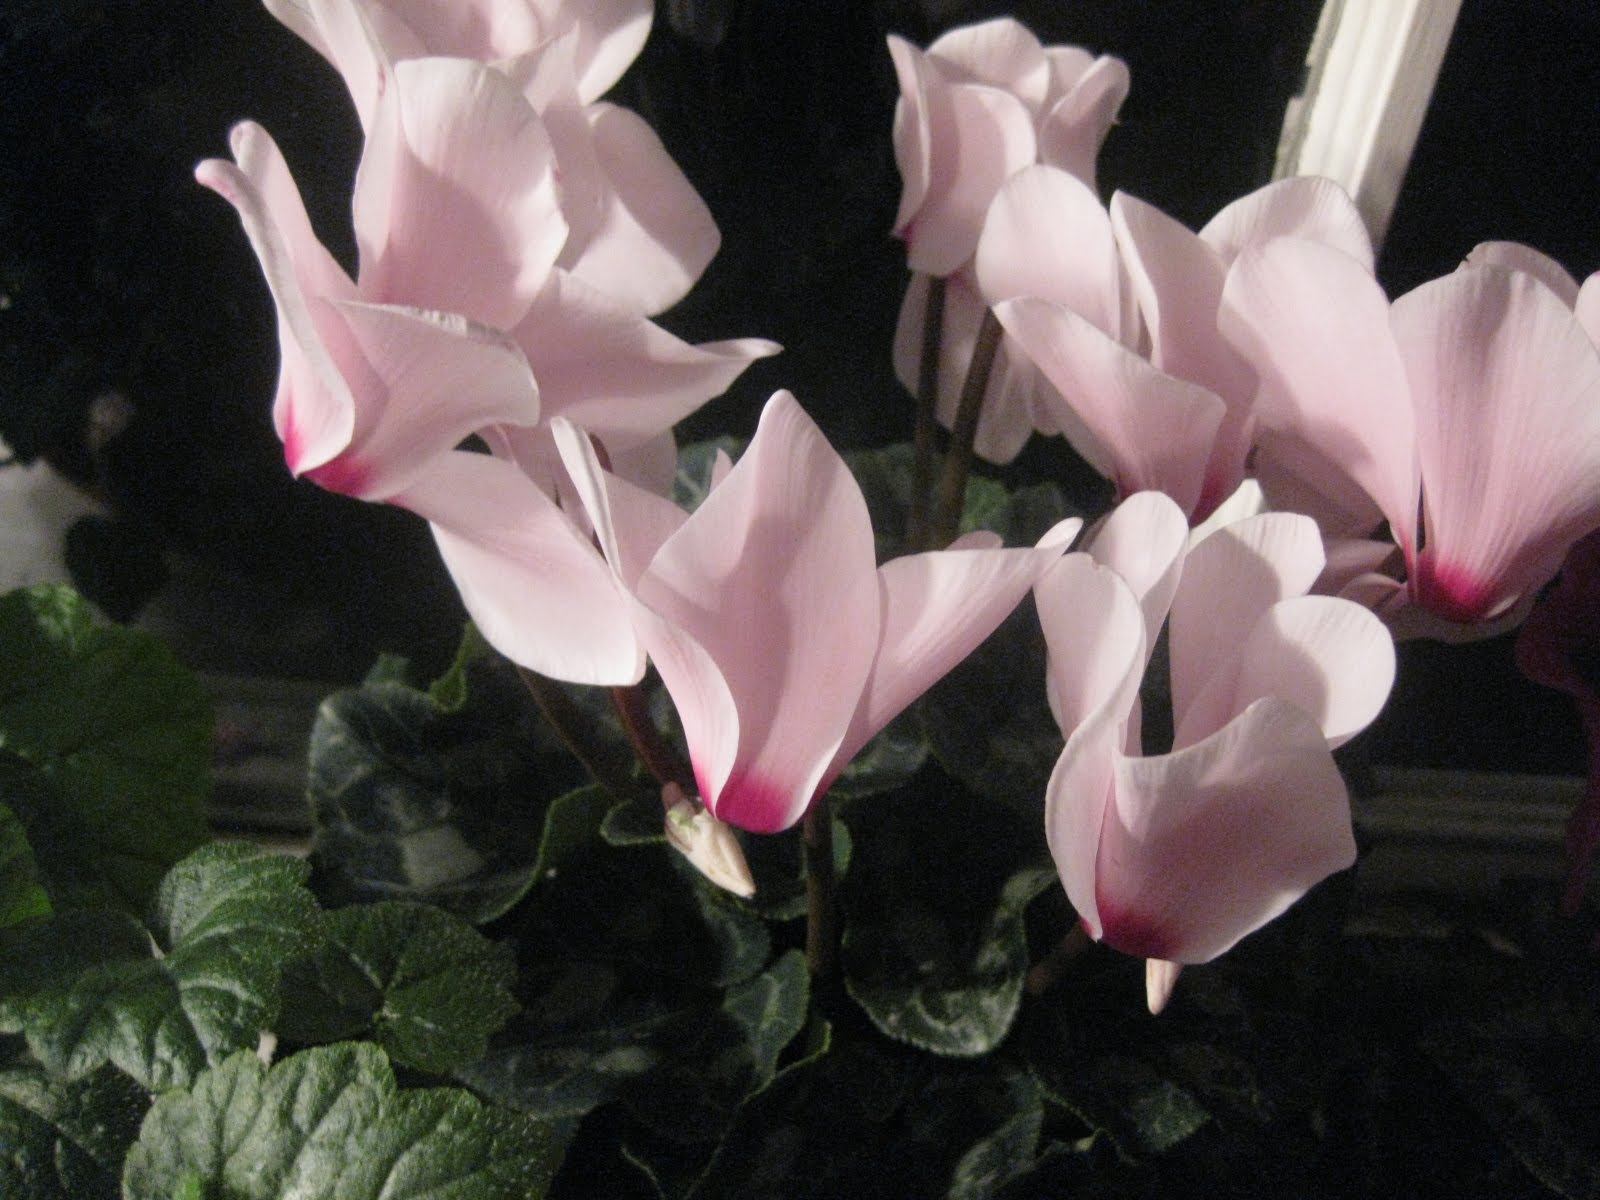 The Spectacular, Re-Blooming Cyclamen